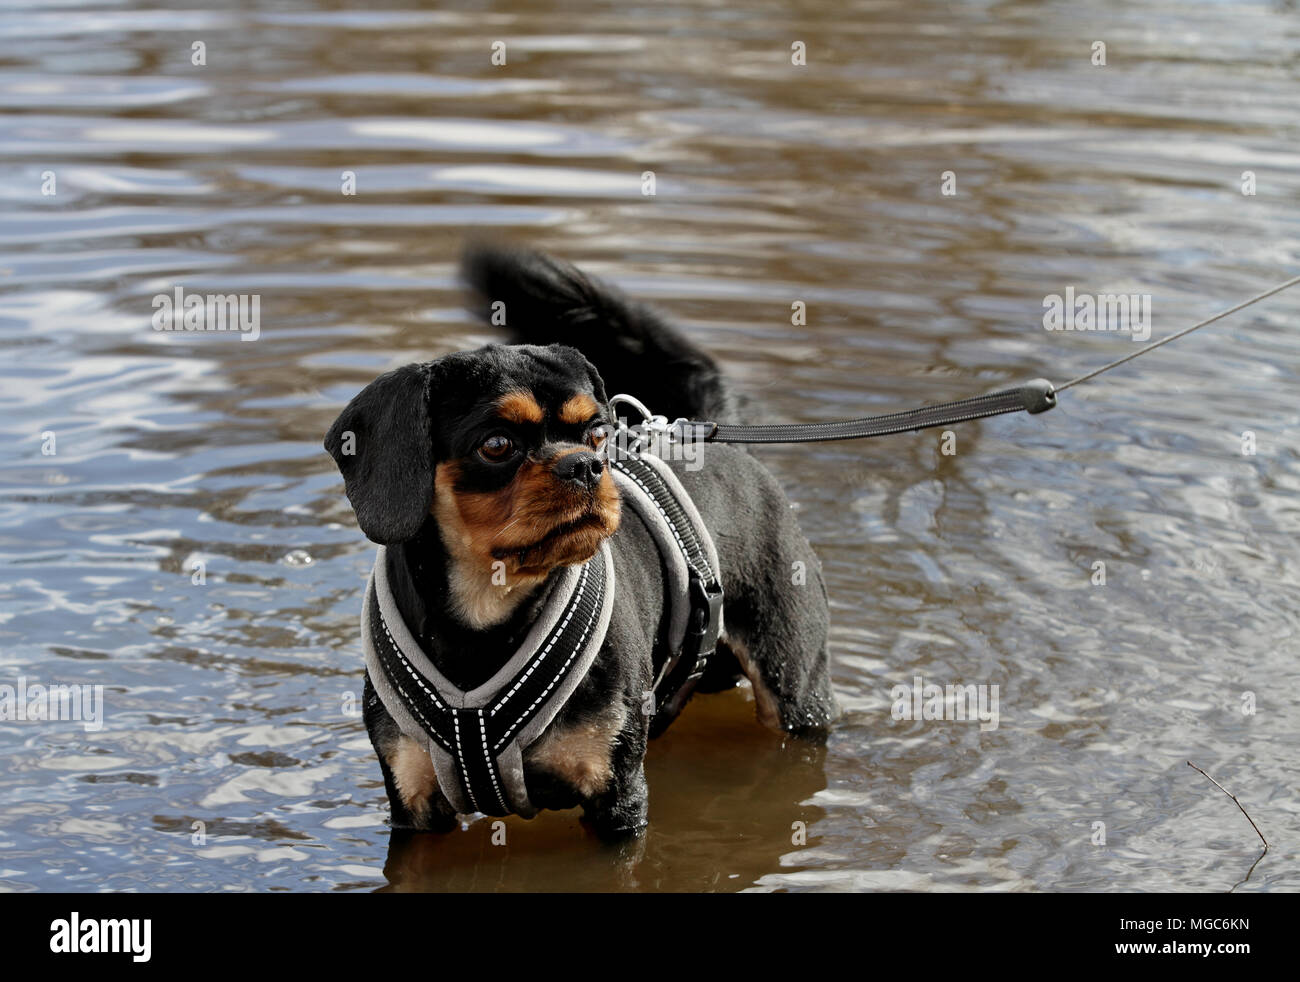 An active spaniel playing in water Stock Photo